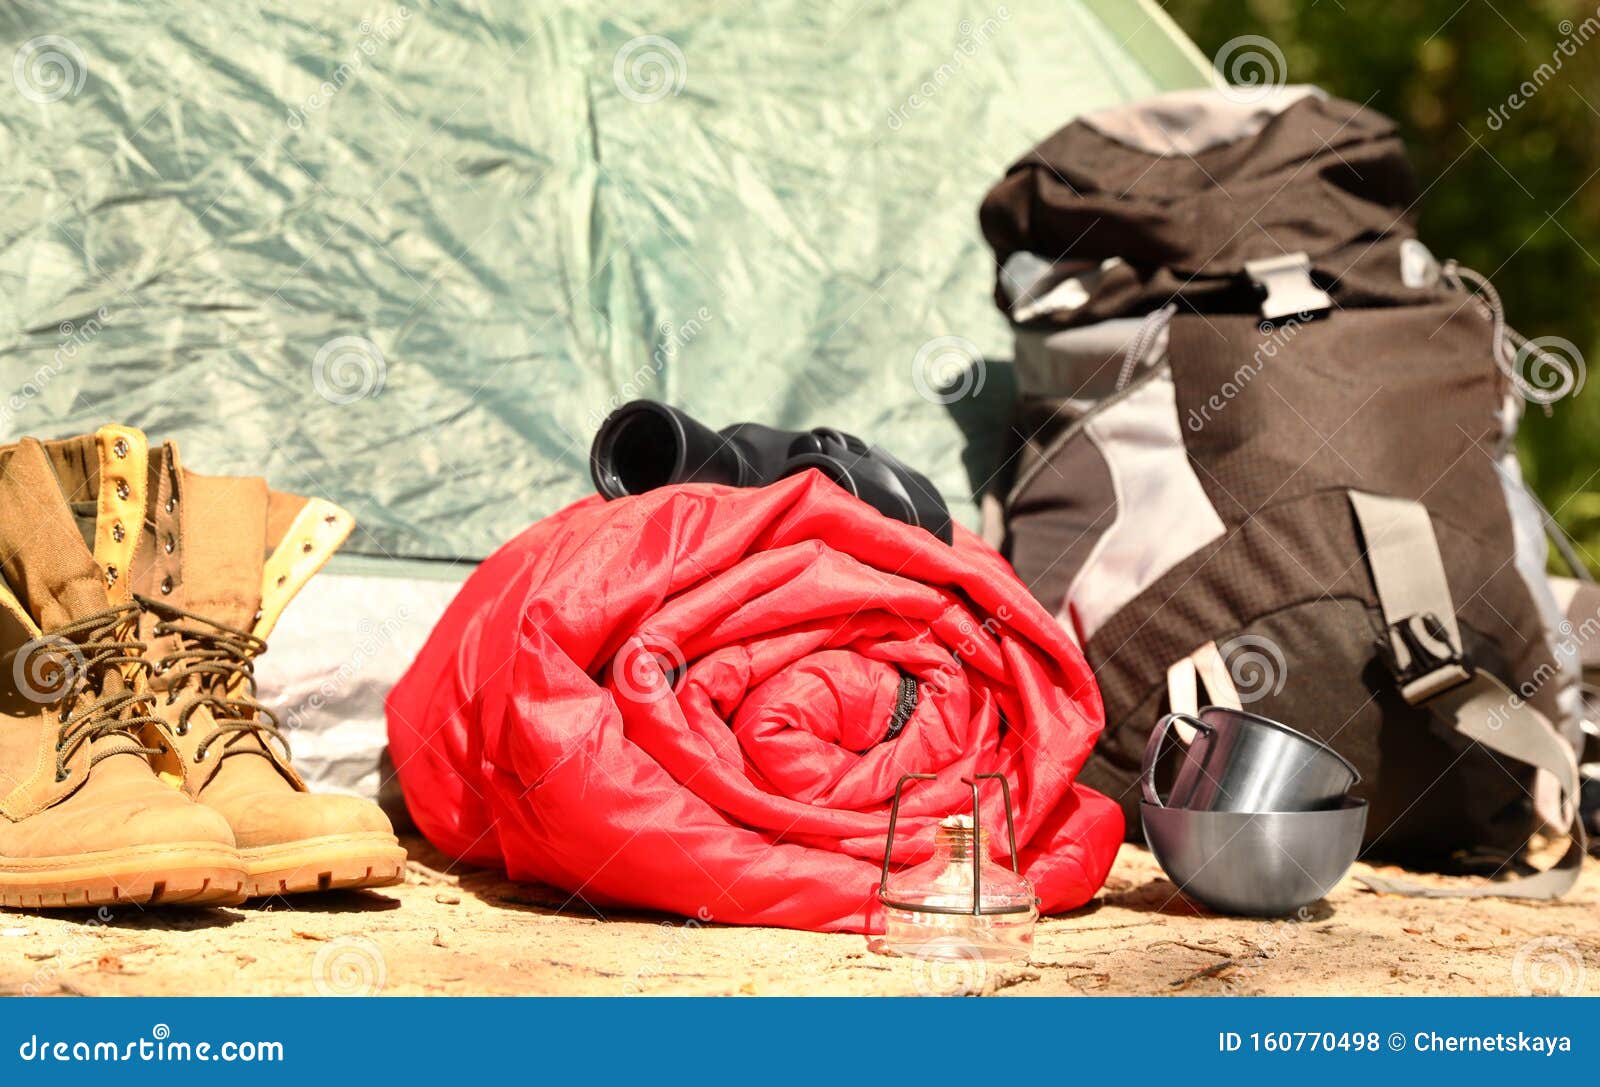 Rolled Sleeping Bag and Other Camping Gear Outdoors Stock Photo - Image ...